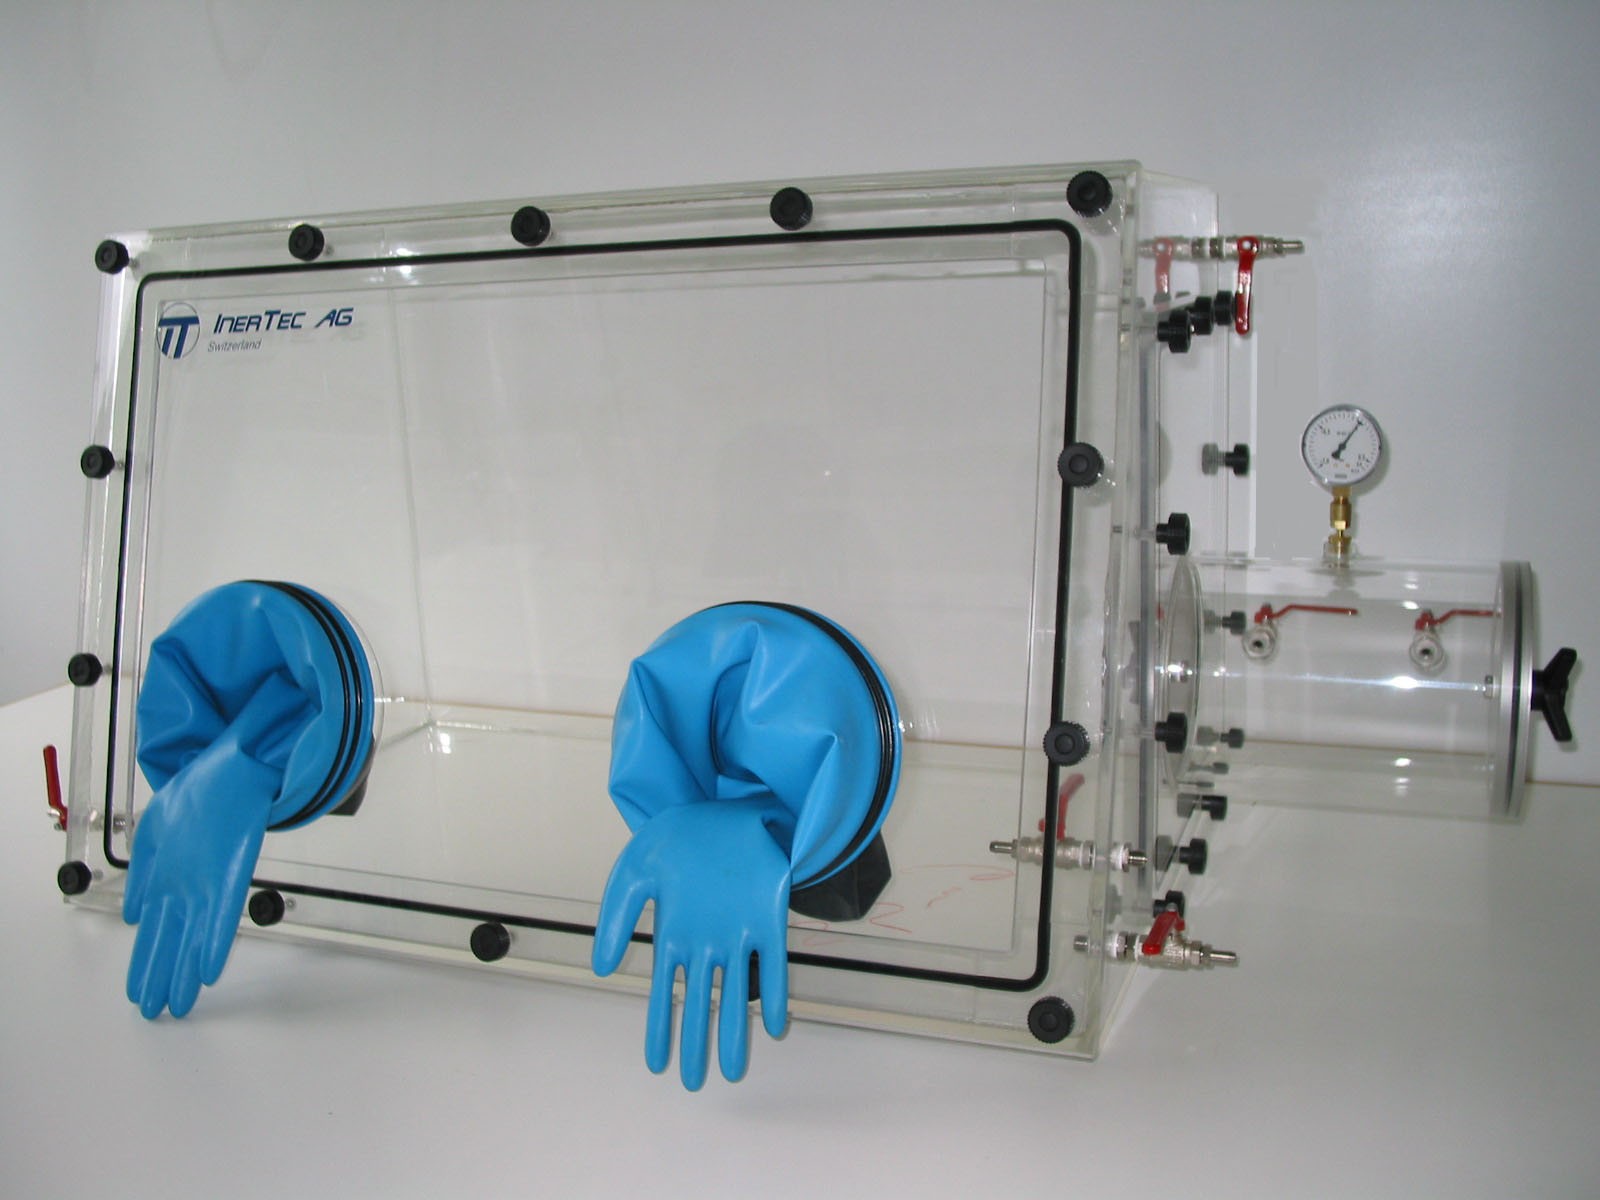 Glovebox made of acrylic&gt; Gas filling: automatic flushing with pressure control, front version: swivels upwards, side version: rectangular lock control: humidity controller and oxygen display with data logger